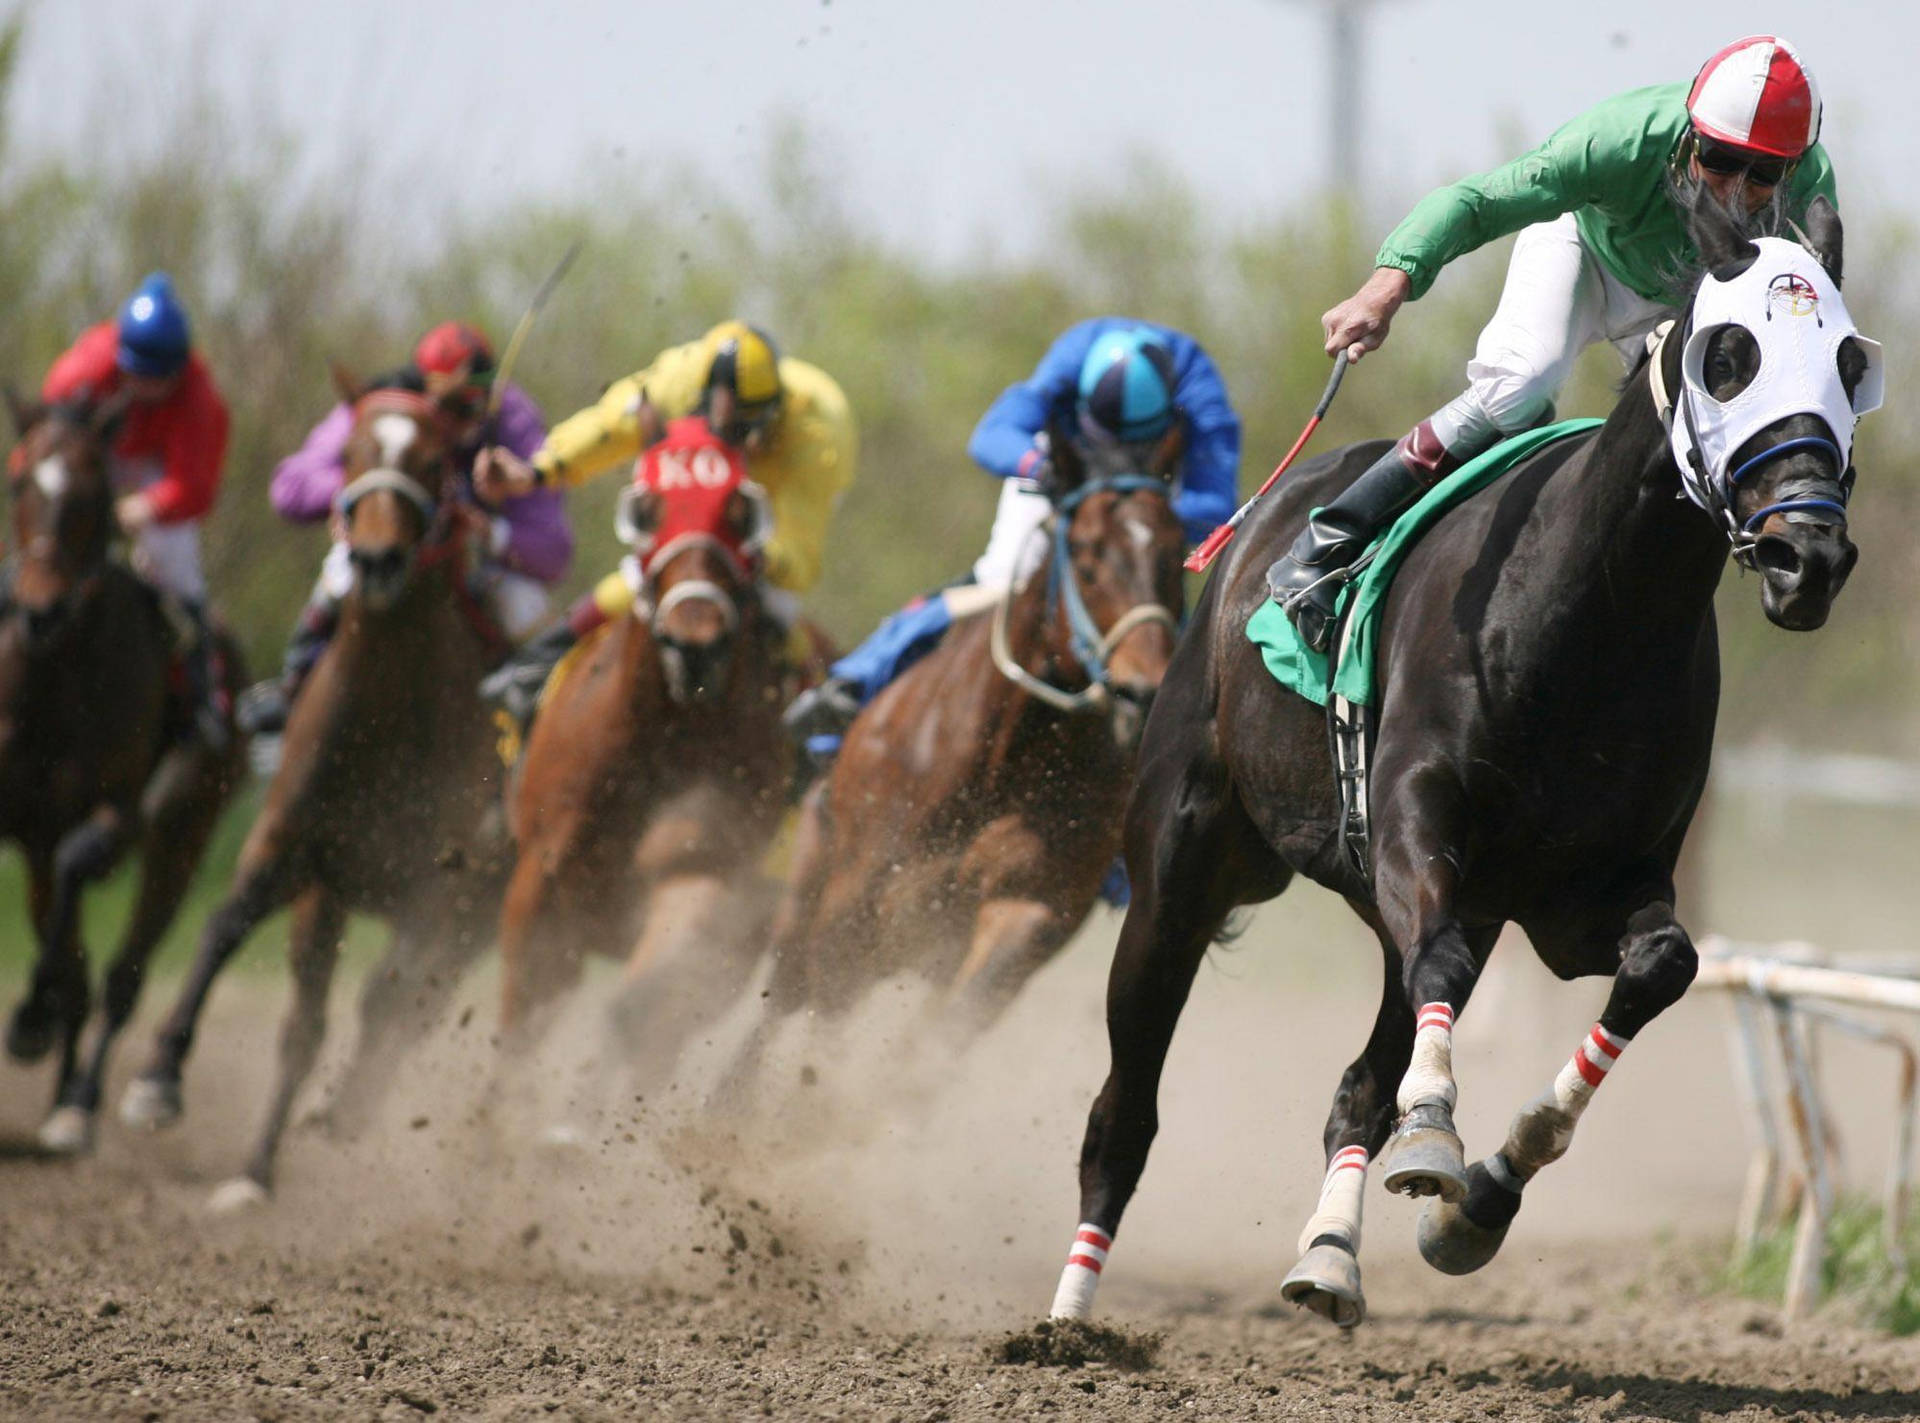 Masked Horses In A Horse Racing